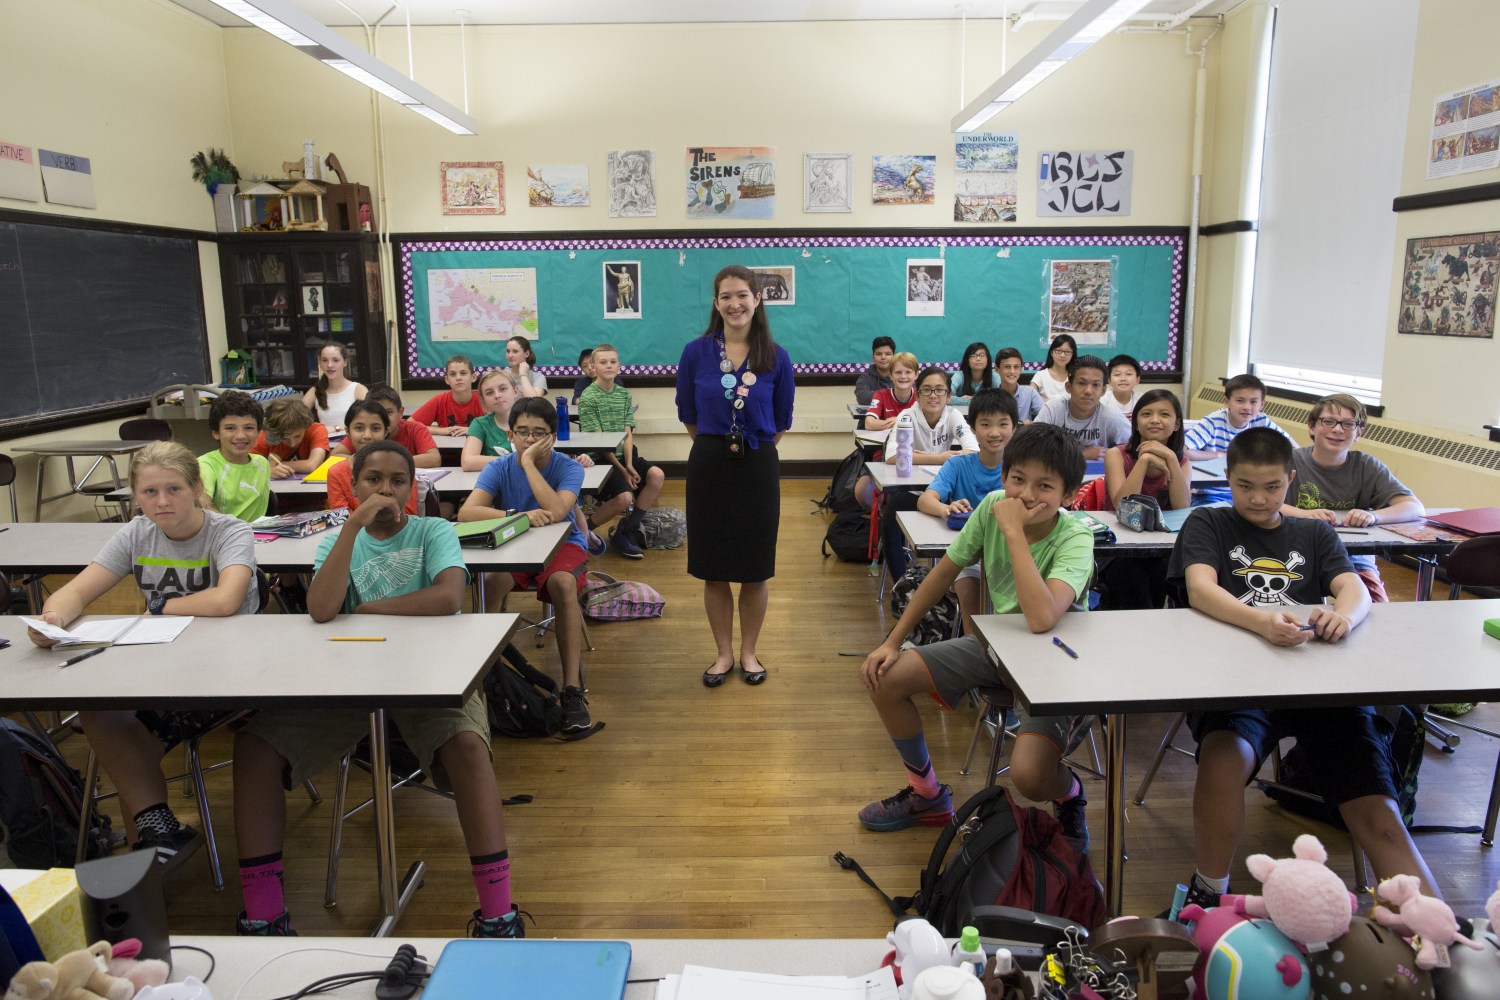 Teacher Elizabeth Moguel poses for a photograph with her seventh grade Latin class at Boston Latin School in Boston, Massachusetts September 17, 2015.